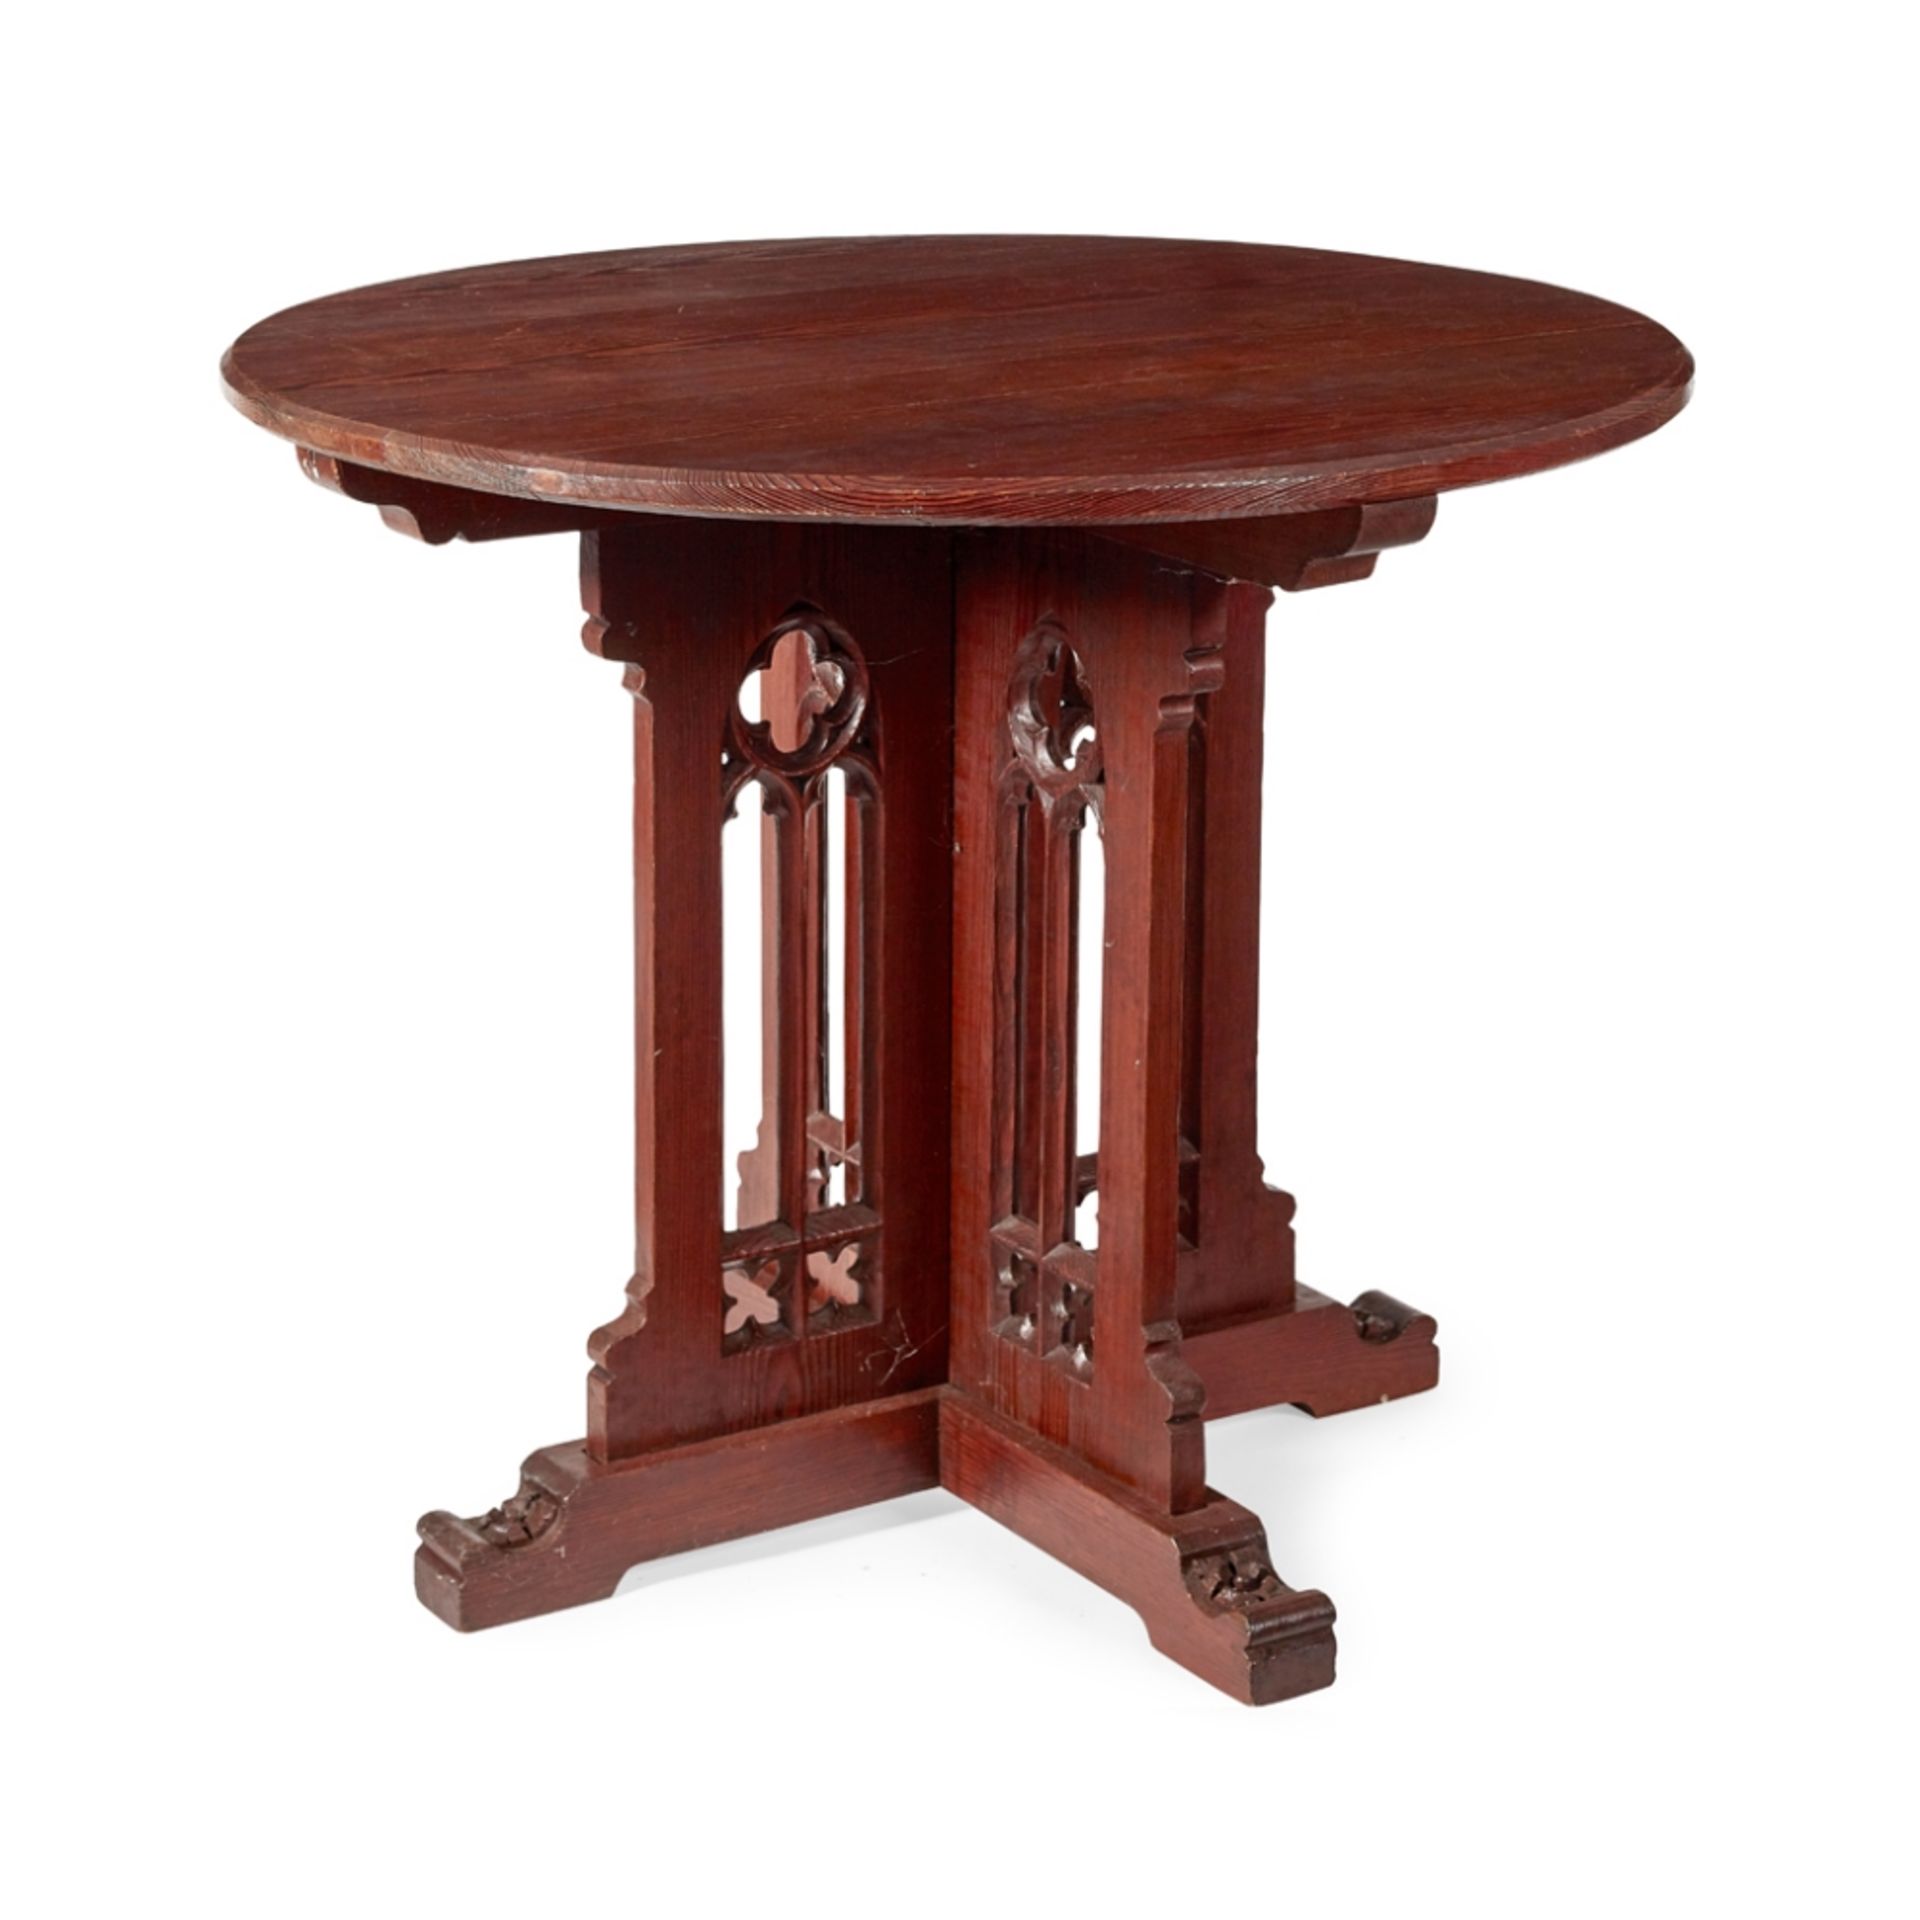 ENGLISH SCHOOLGOTHIC REVIVAL PITCH PINE CENTRE TABLE, CIRCA 1860 the chamfered cut circular top